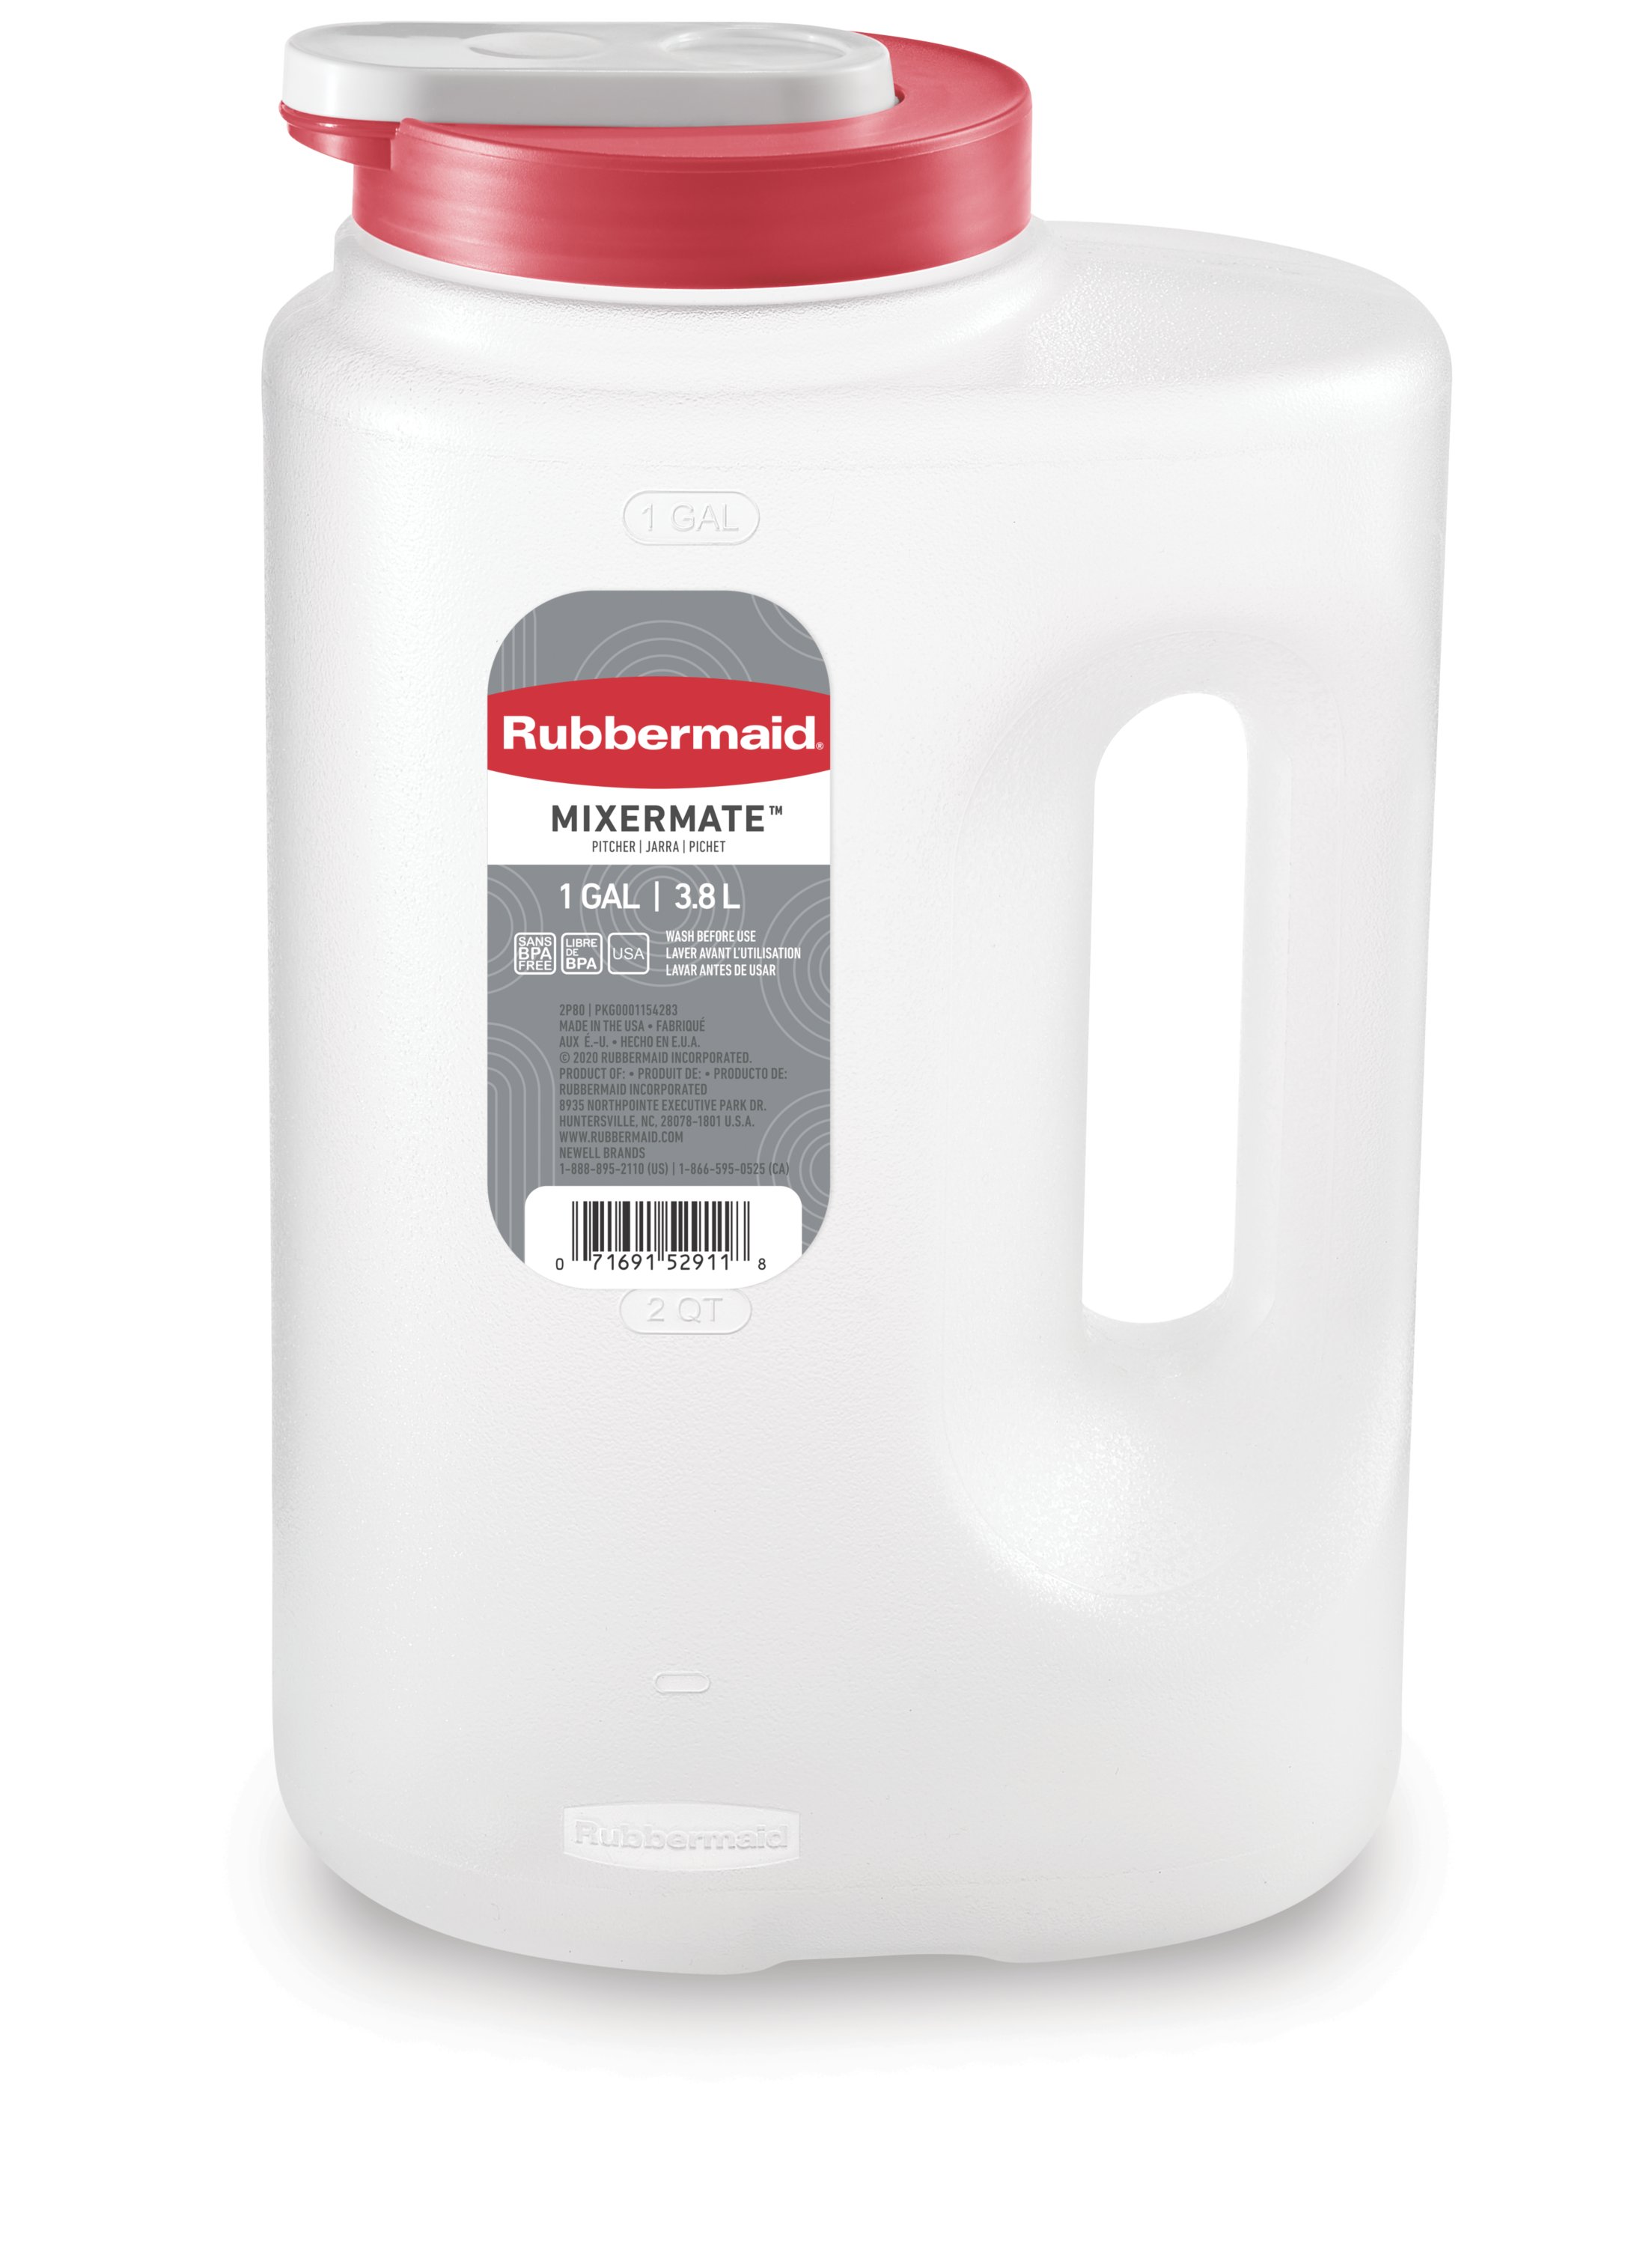 https://s7d9.scene7.com/is/image/NewellRubbermaid/2122604-rubbermaid-food-storage-mixermate-pitcher-1g-red-in-pack-straight-on